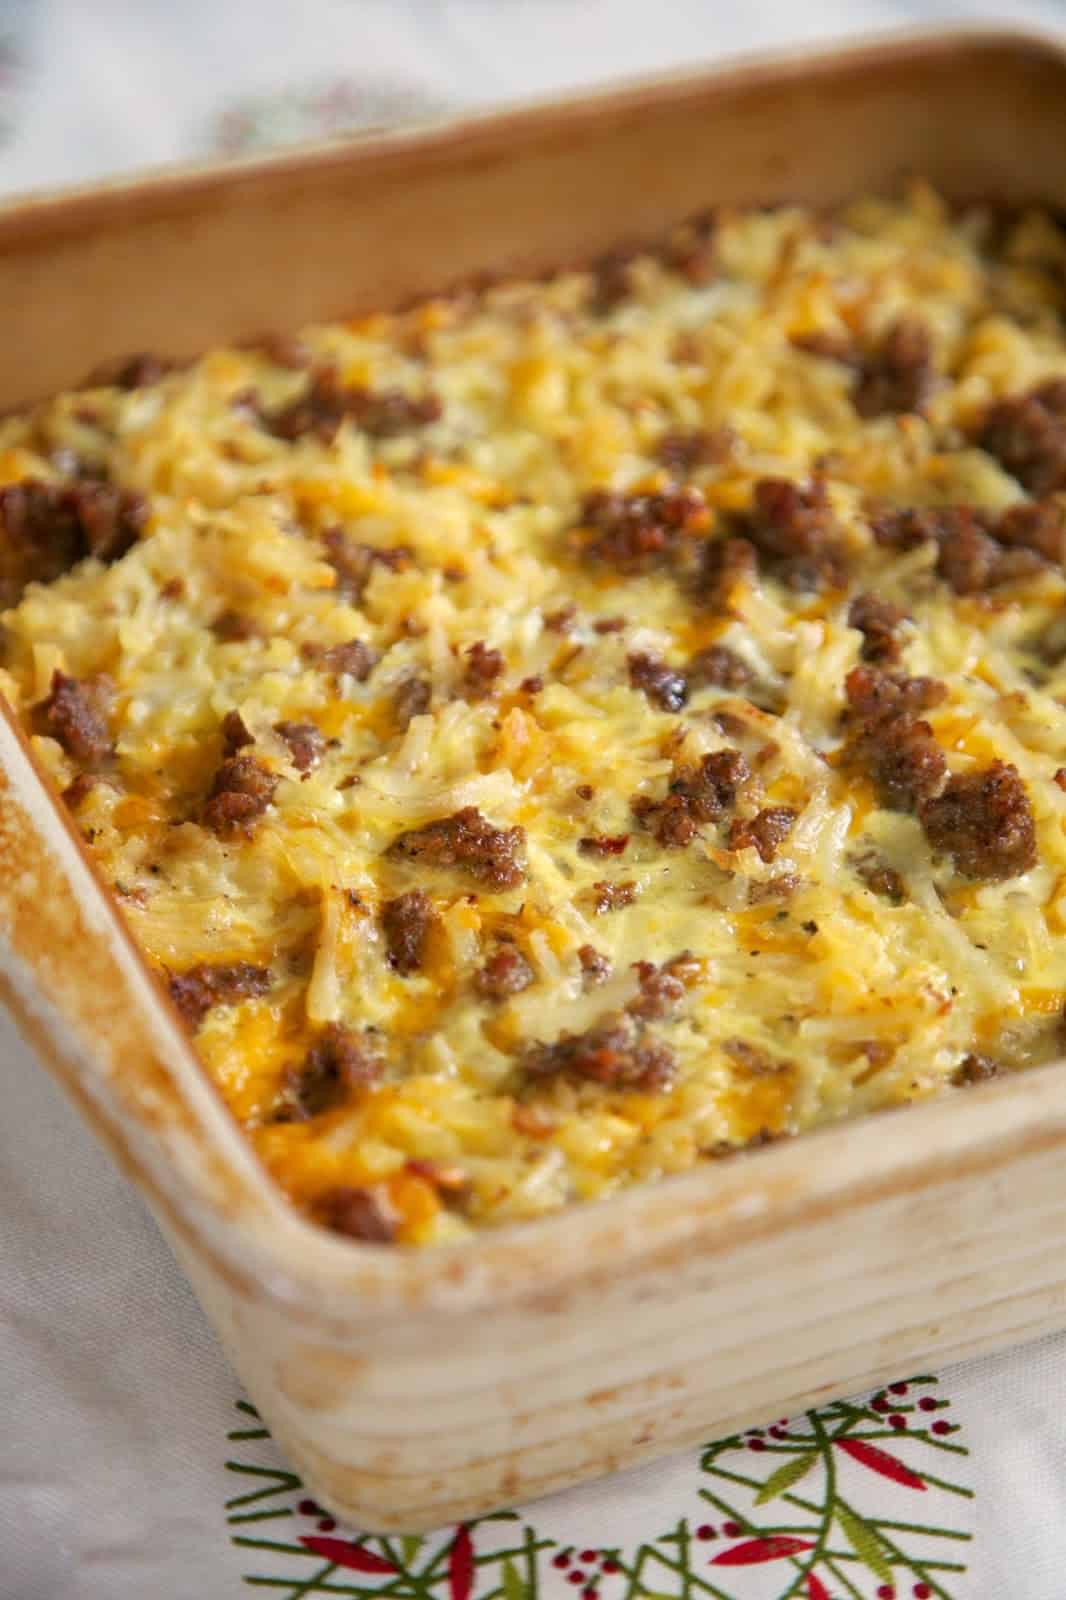 Sausage Hash Brown Breakfast Casserole - hash browns, sausage, eggs & cheese - can be made ahead of time and refrigerated until ready! Great for overnight guest and Christmas morning!